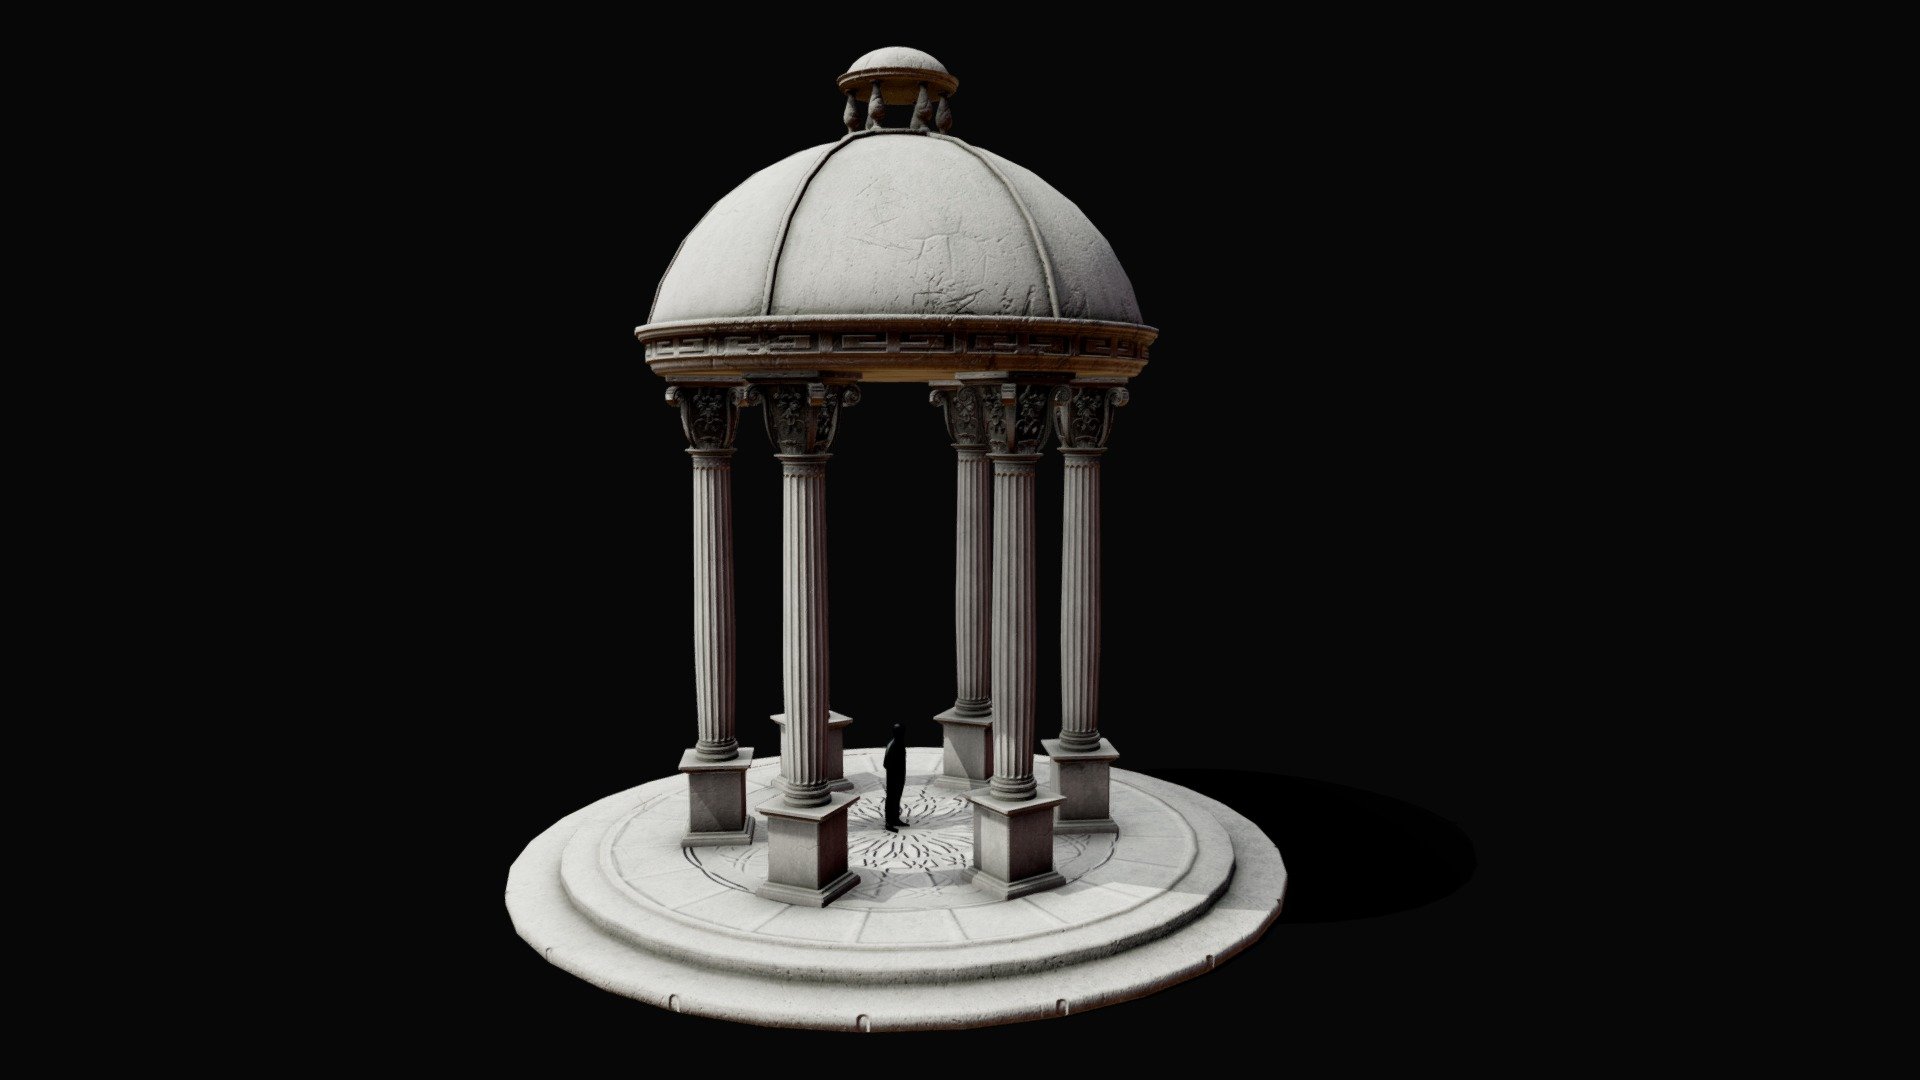 A gazebo is a pavilion structure, sometimes octagonal or turret-shaped, often built in a park, garden or spacious public area 3d model